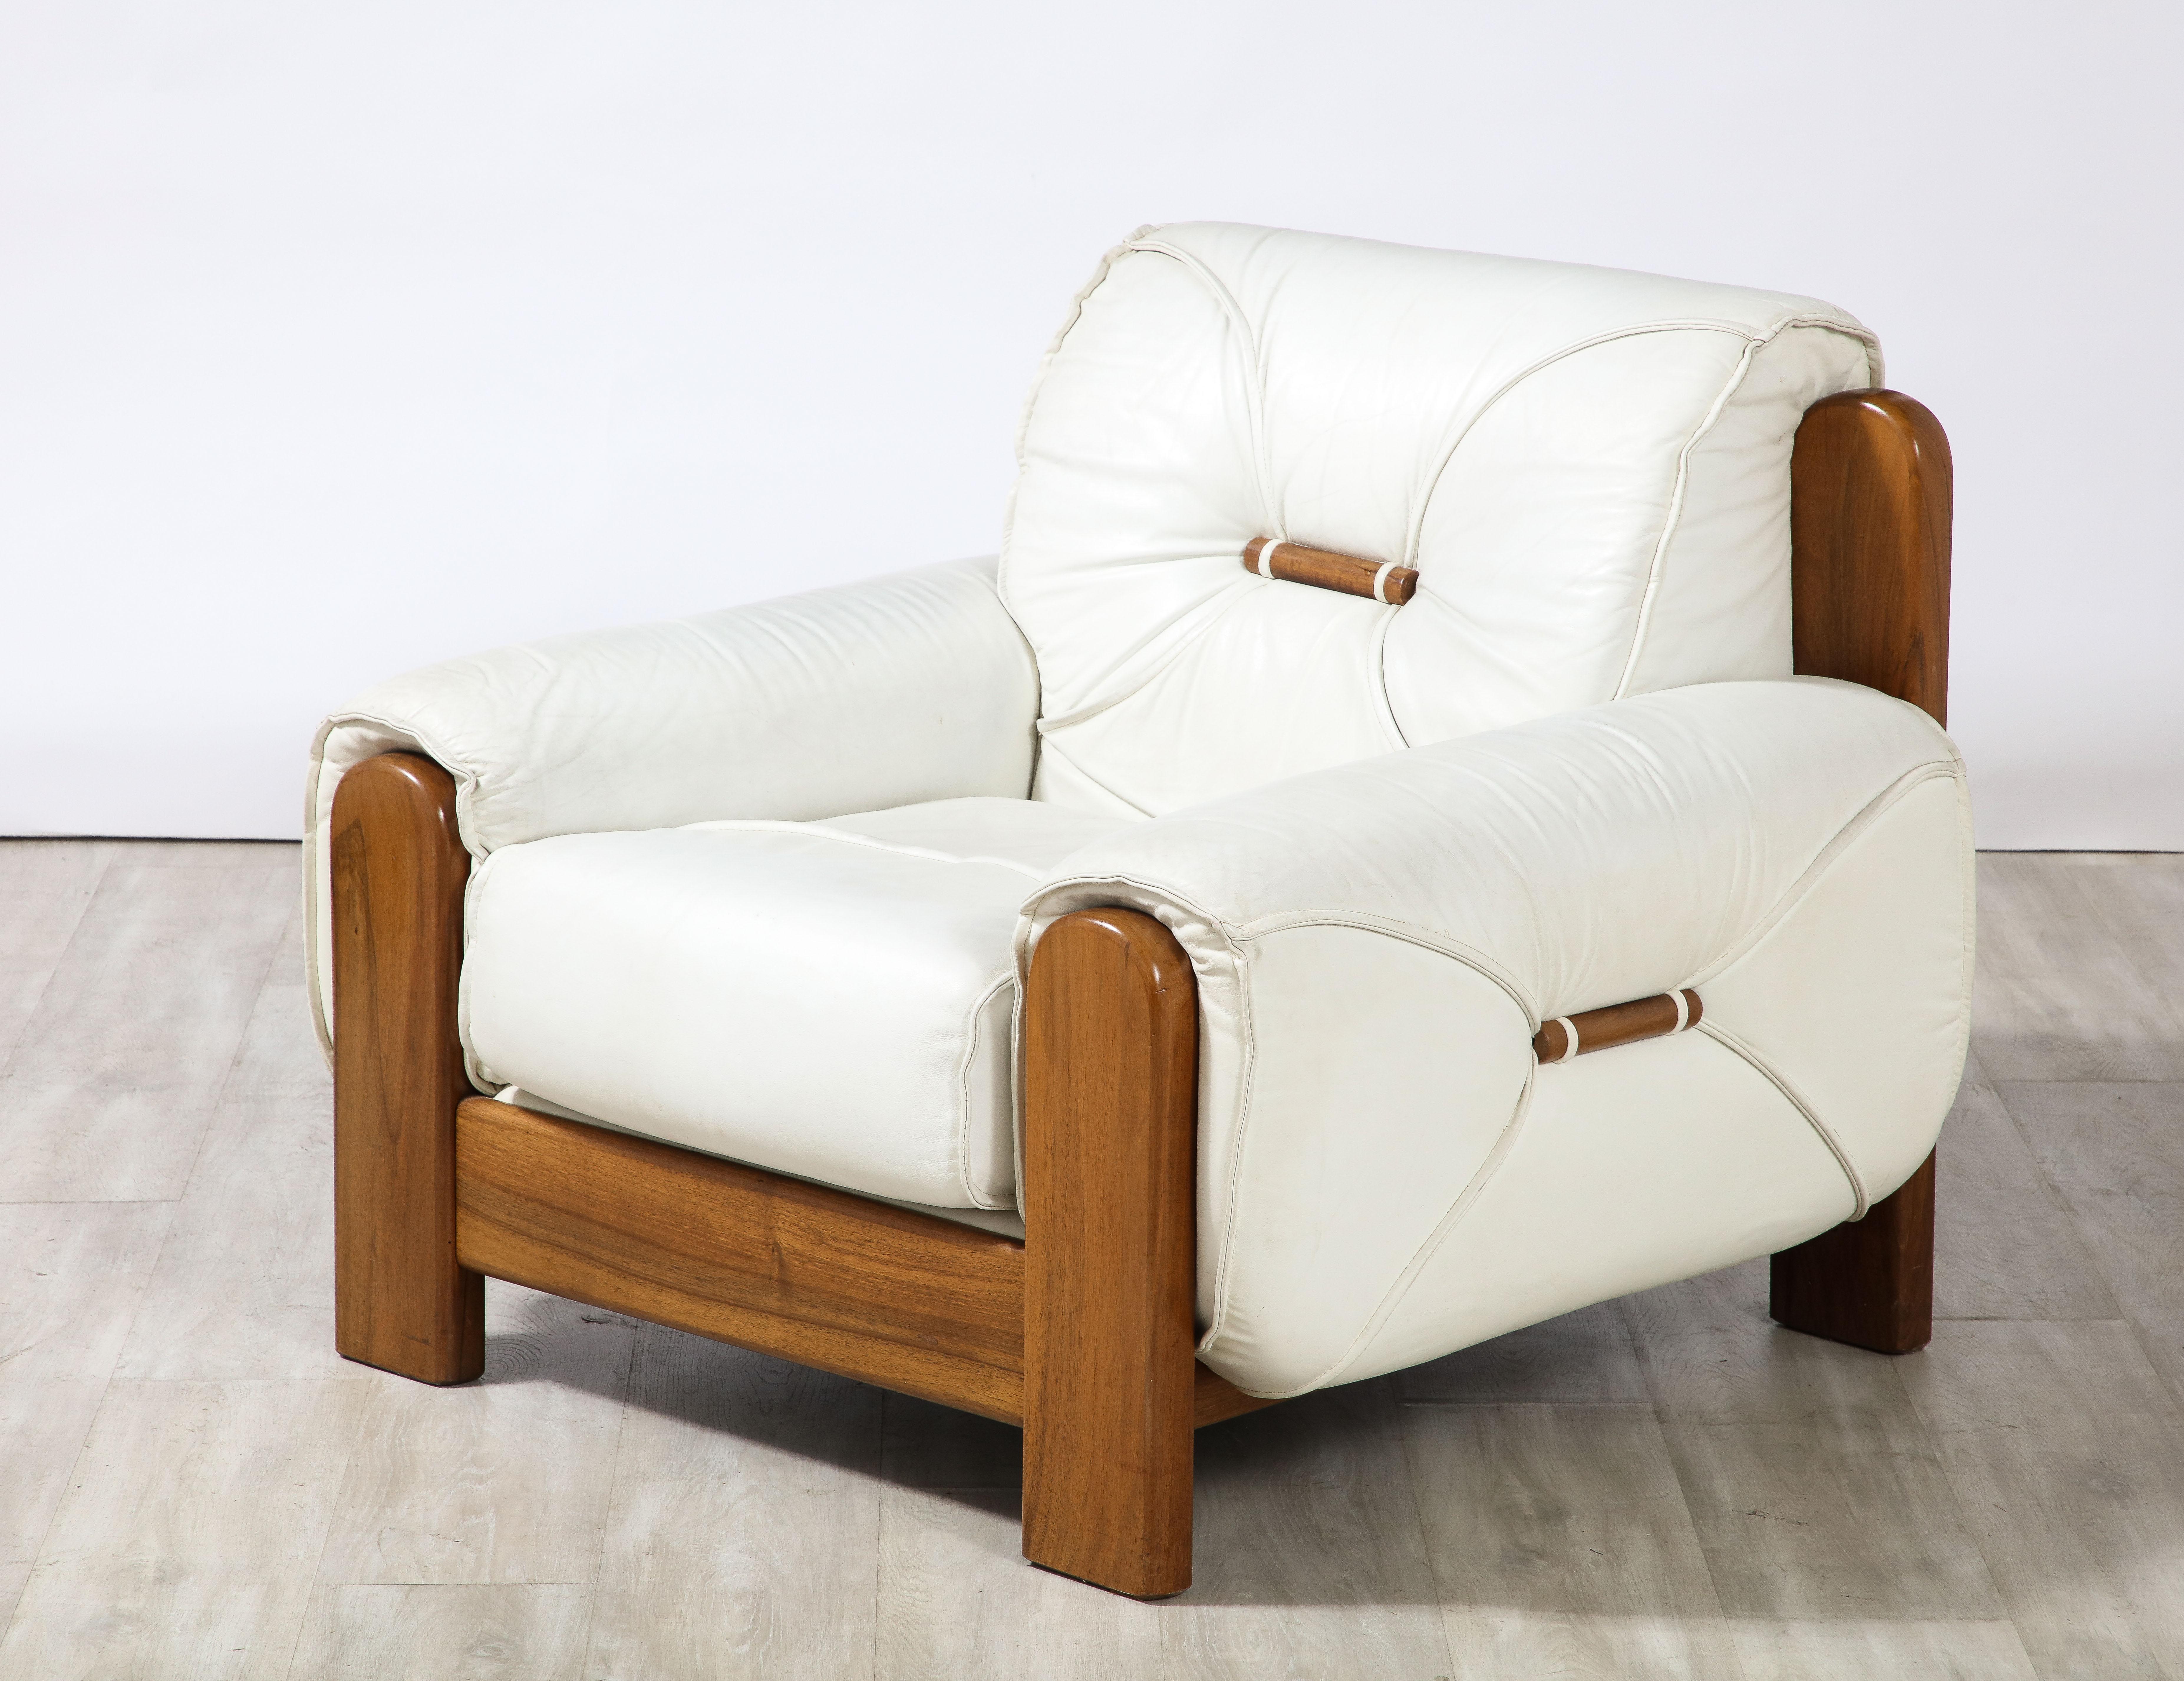 Pair of Italian 1970's Walnut and White Leather Lounge Chairs For Sale 5